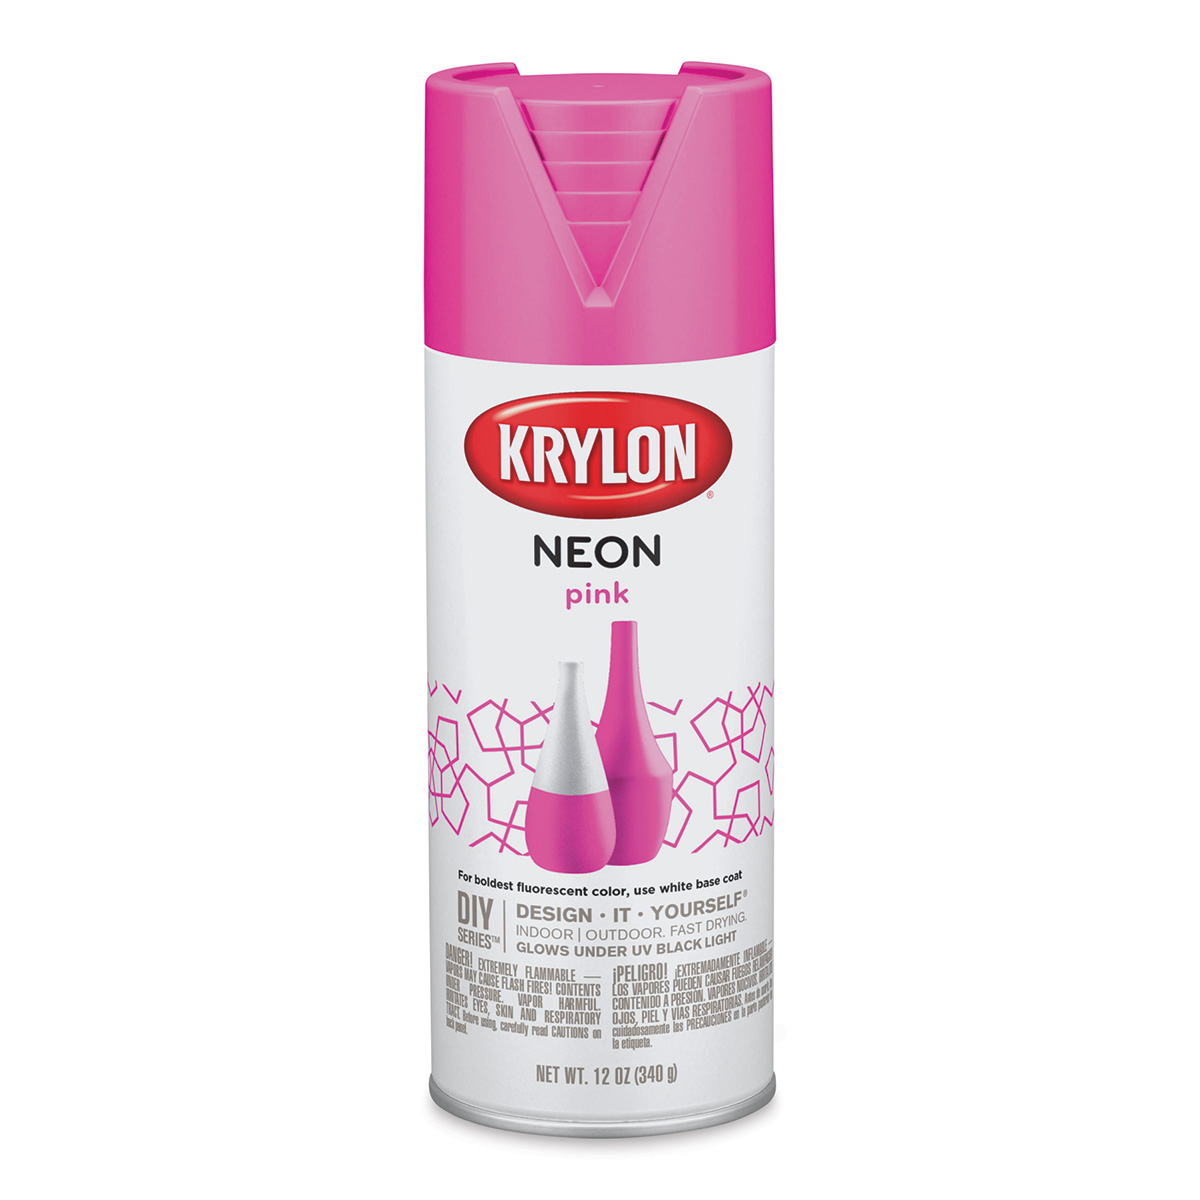 Krylon Spray Paint on Instagram: Today's #DailyShake: She's back and  hotter than ever. For iconic hot pink spray paint, it has to be Krylon  Fusion All-In-One. #Krylon #Pink #ColorInspo #DreamColor